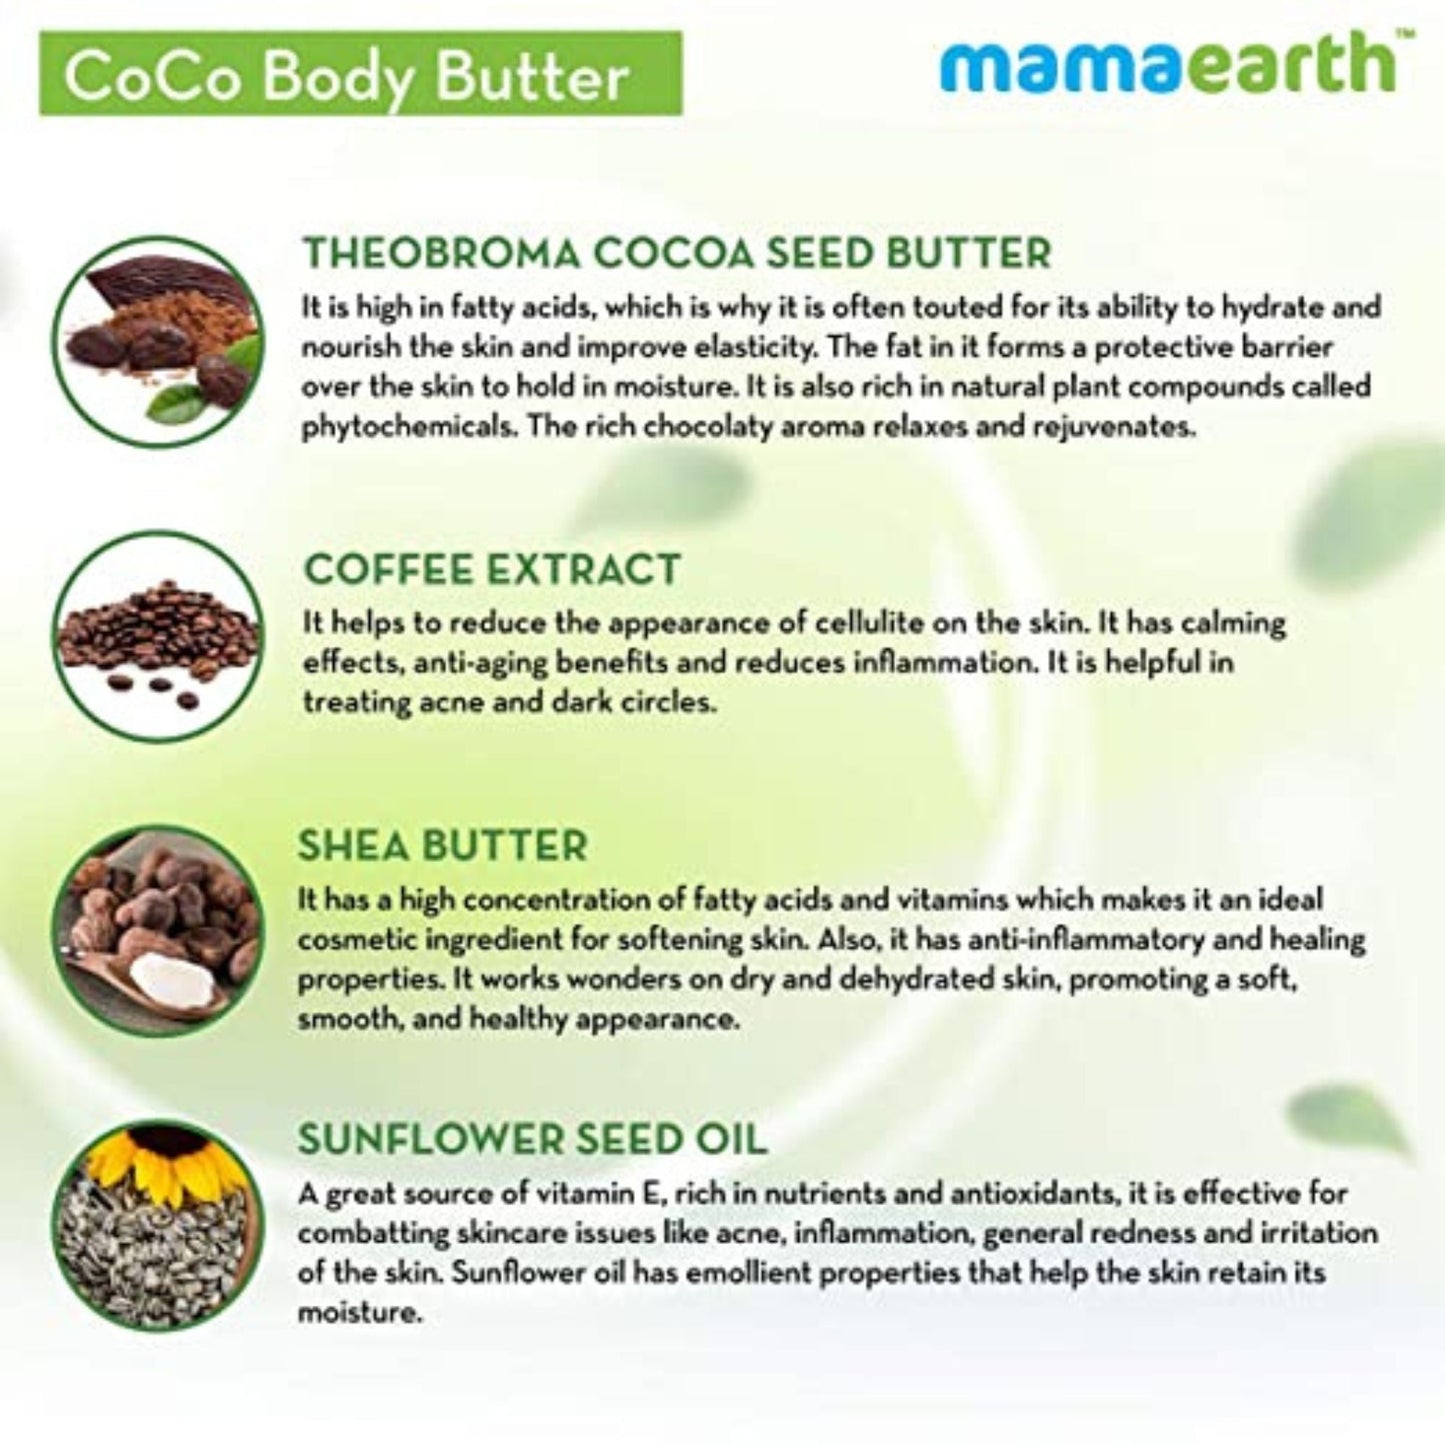 Mamaearth CoCo with Coffee and Cocoa for Deep Moisturization Body Cream Butter For Dry Skin, For Winters Better Than Body Lotion (200g)